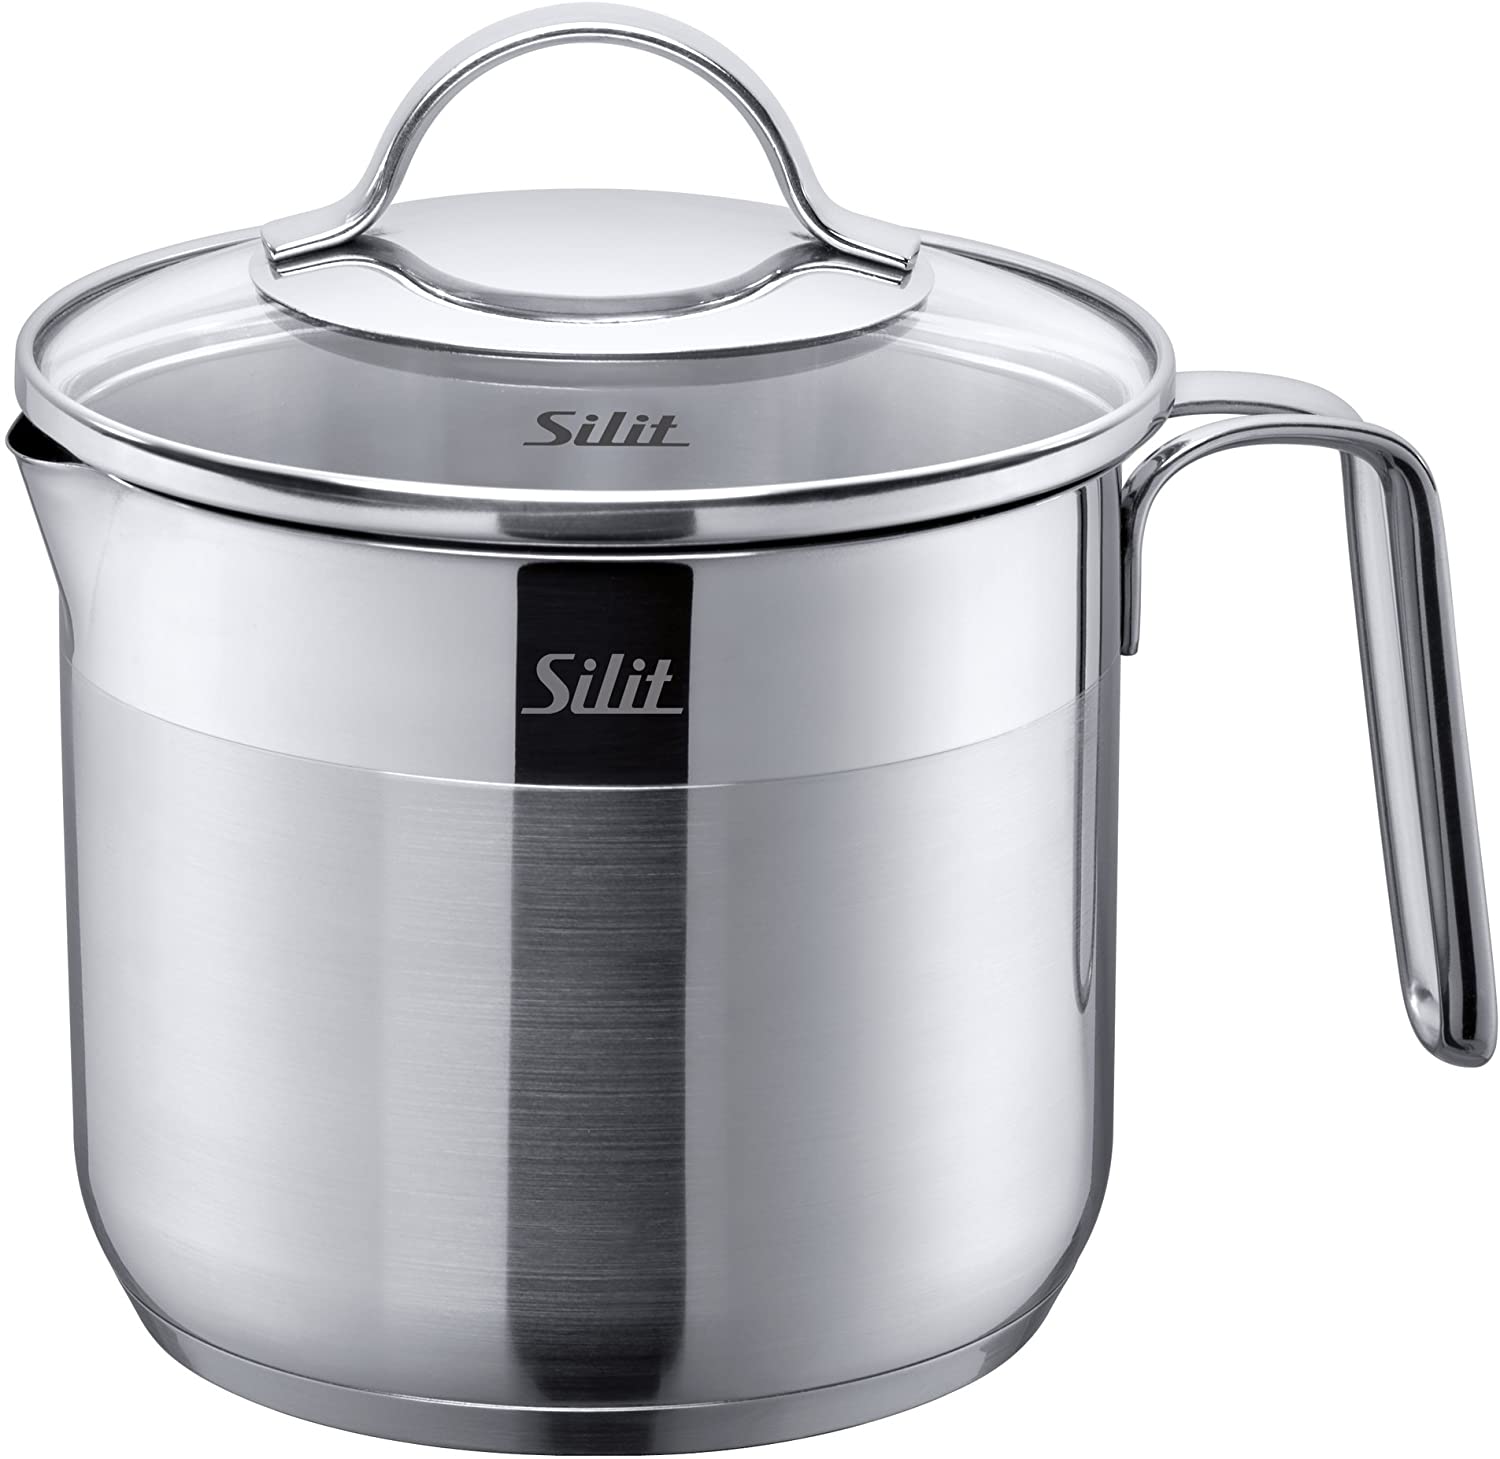 Silit Achat Milk Pot with Glass Lid 14 cm High Cooking Pot 1.7 L Stainless Steel Partially Frosted Induction Uncoated Oven Safe